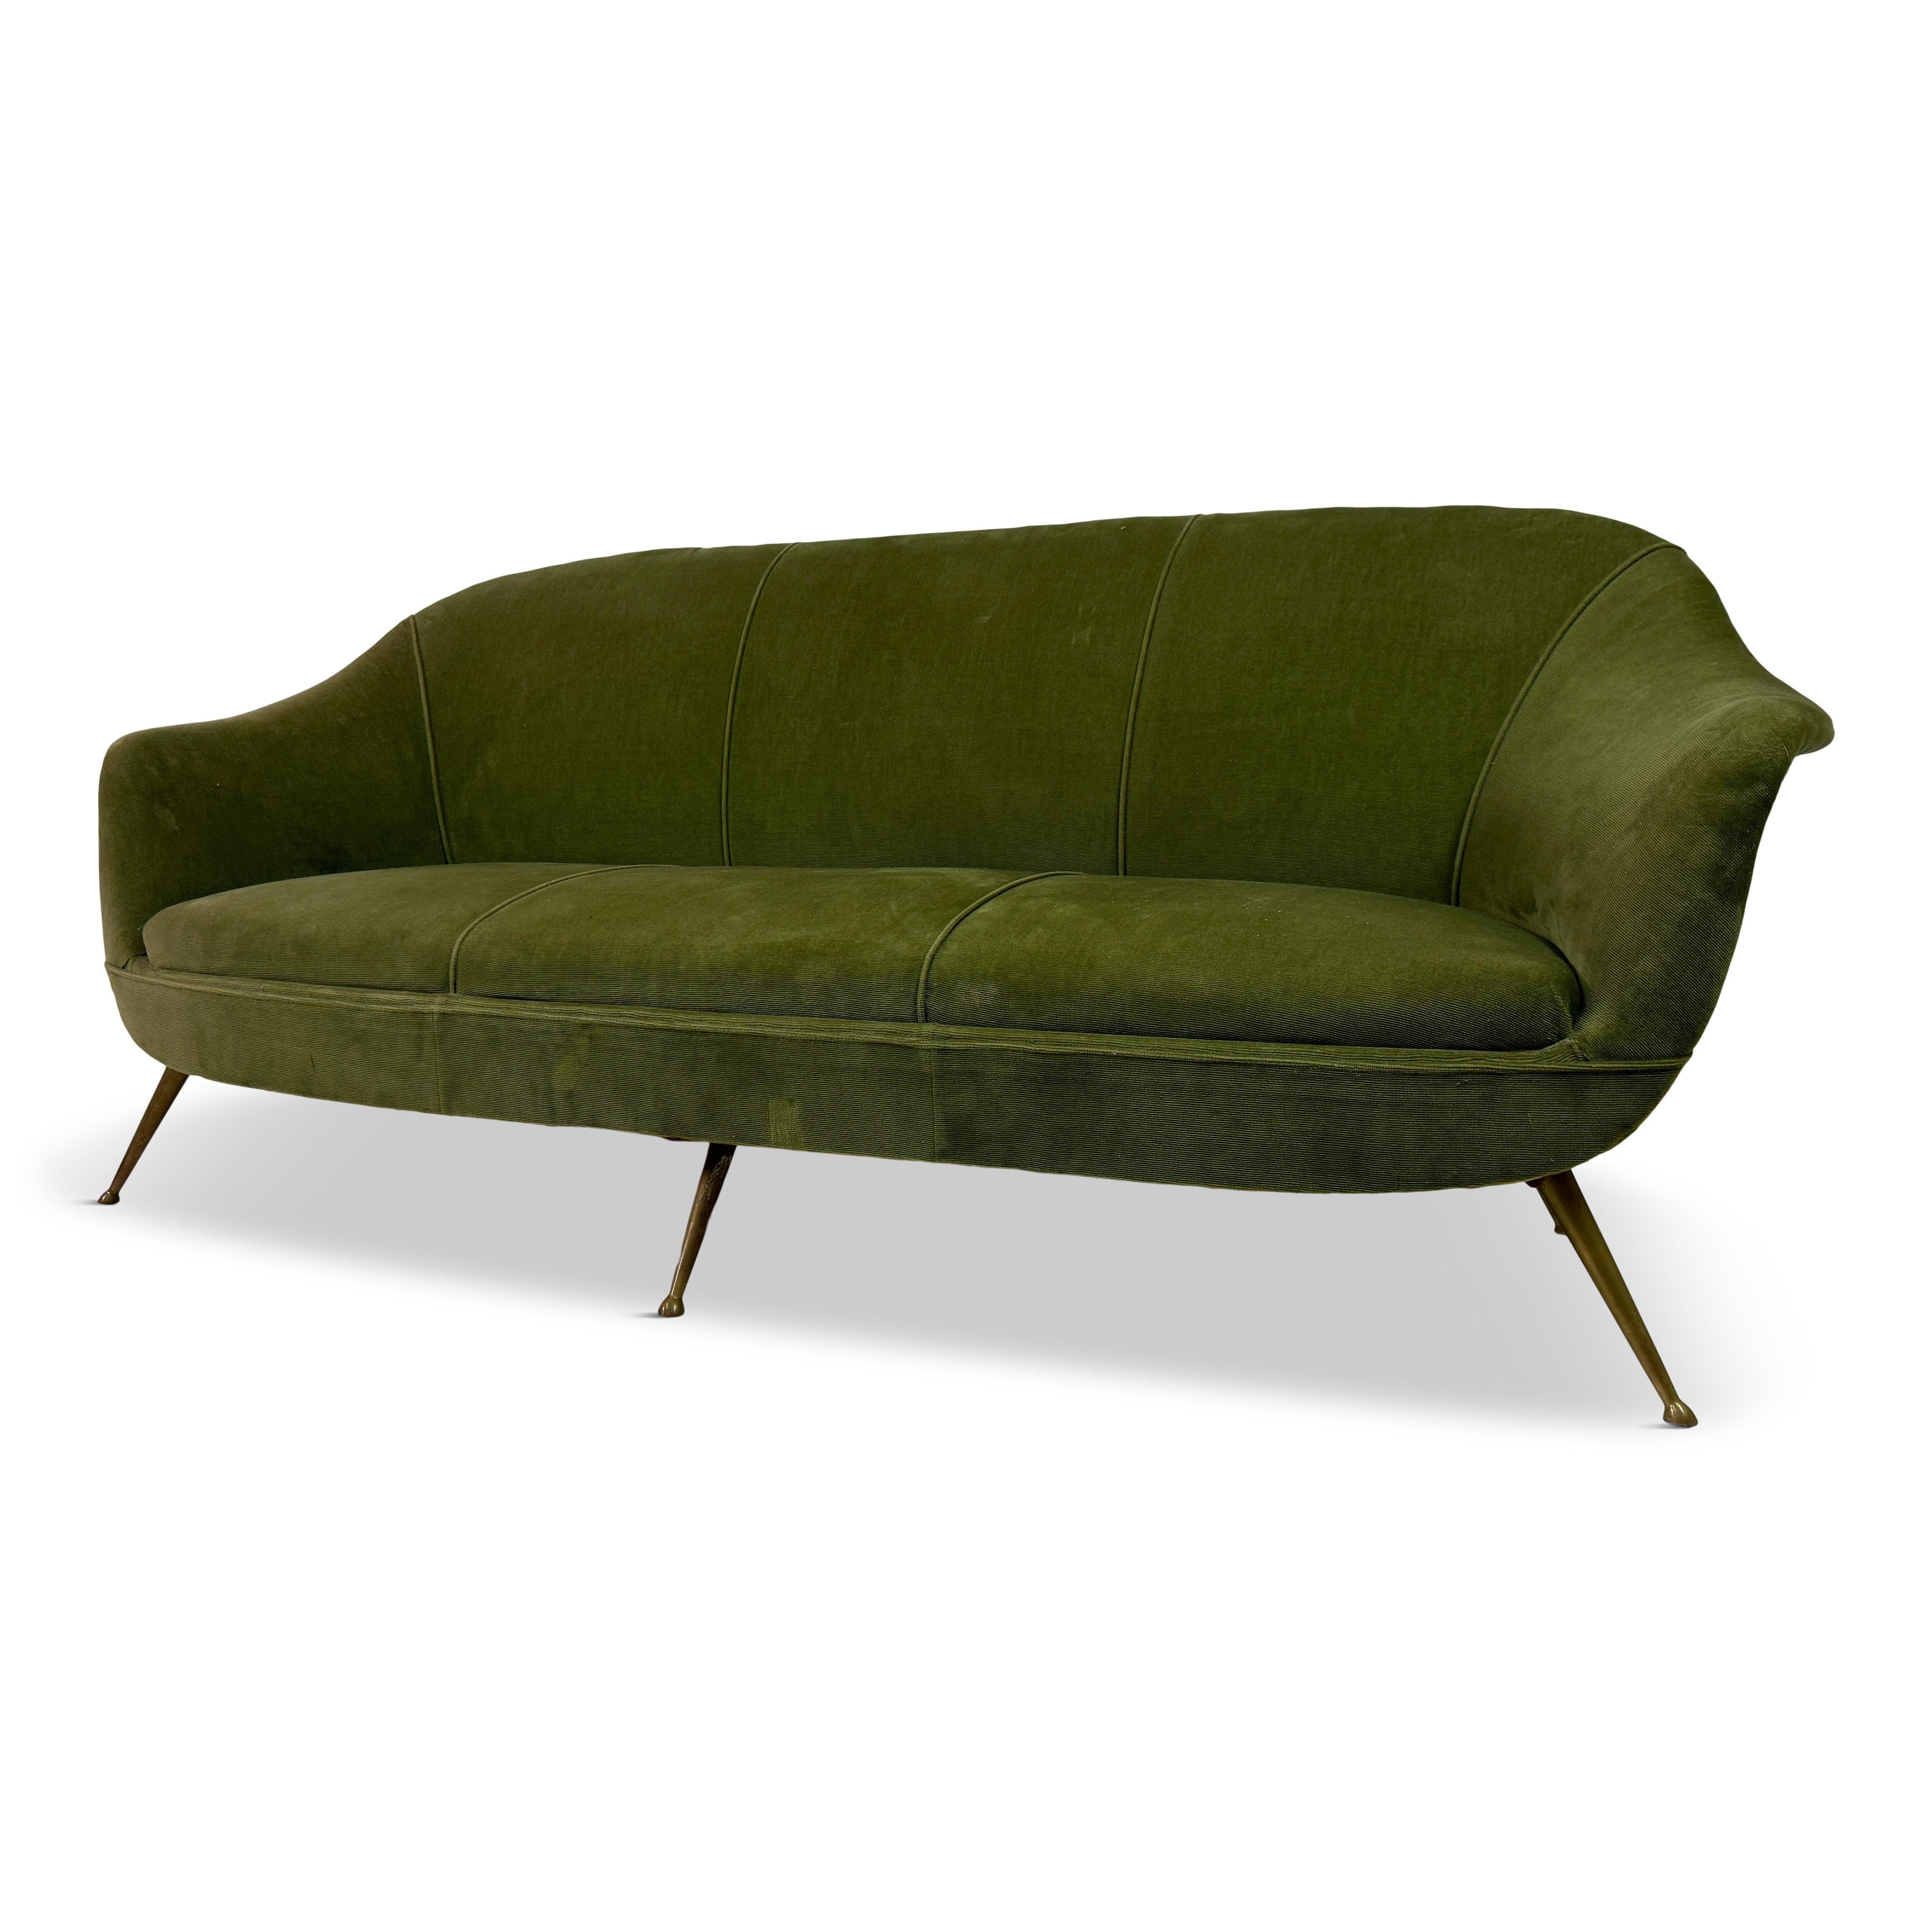 Sofa

Organic flowing shape

Lipped arm rests

Brass feet

Italy 1960s

Please note that the fabric is not new and shows signs of age and use. Reupholstery is possible before purchase.
